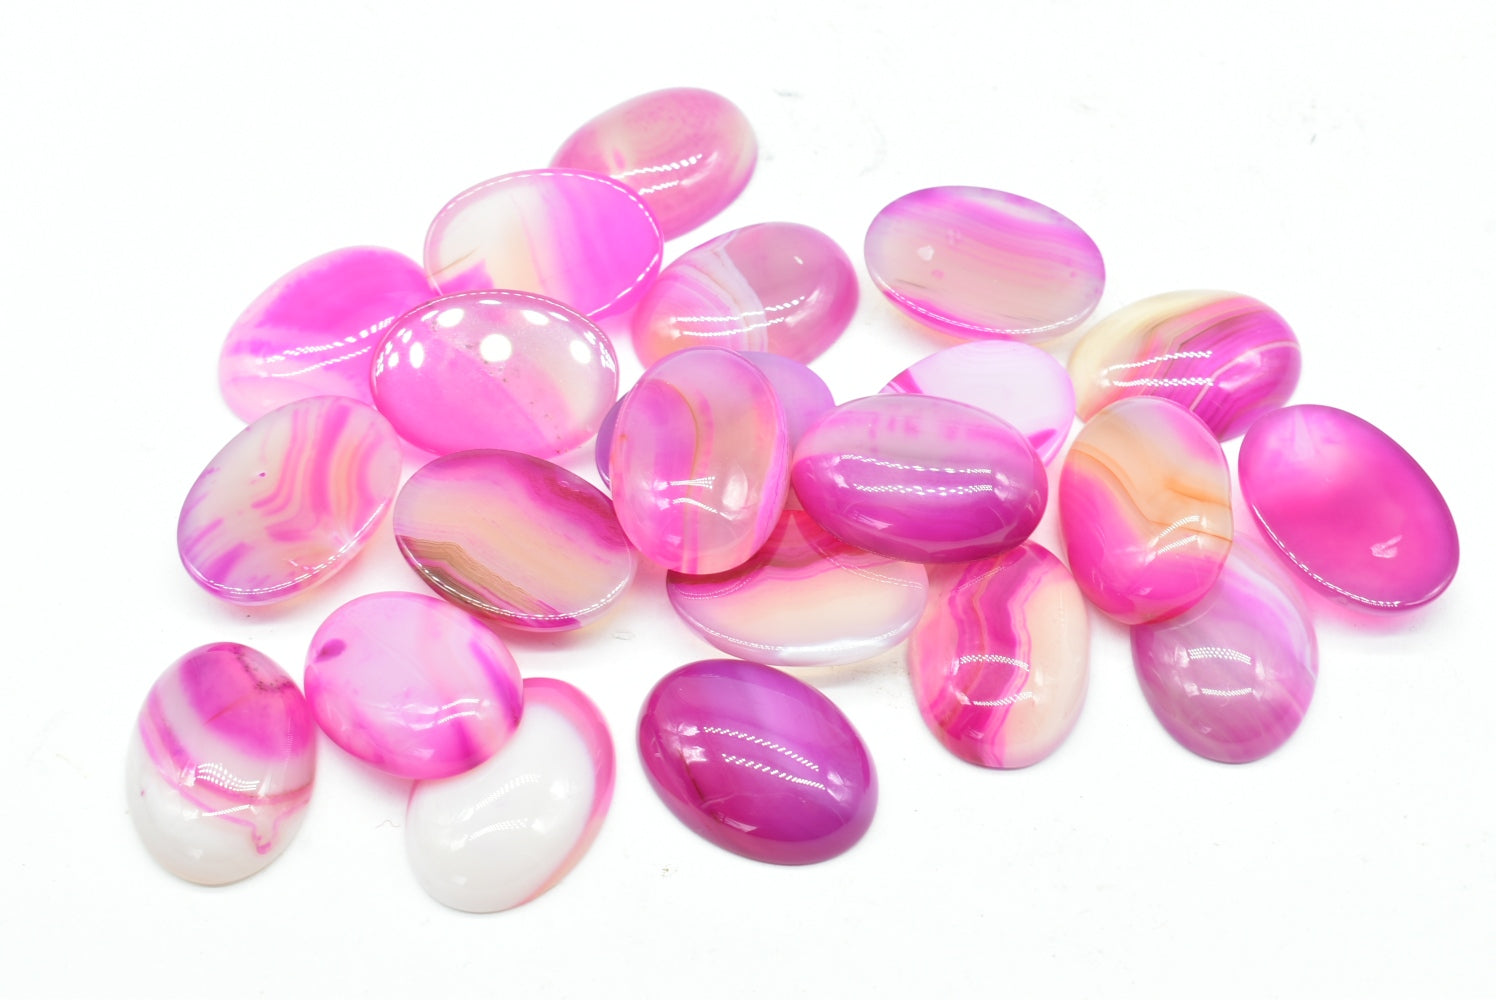 Oval Agate Cabochon - 25 mm